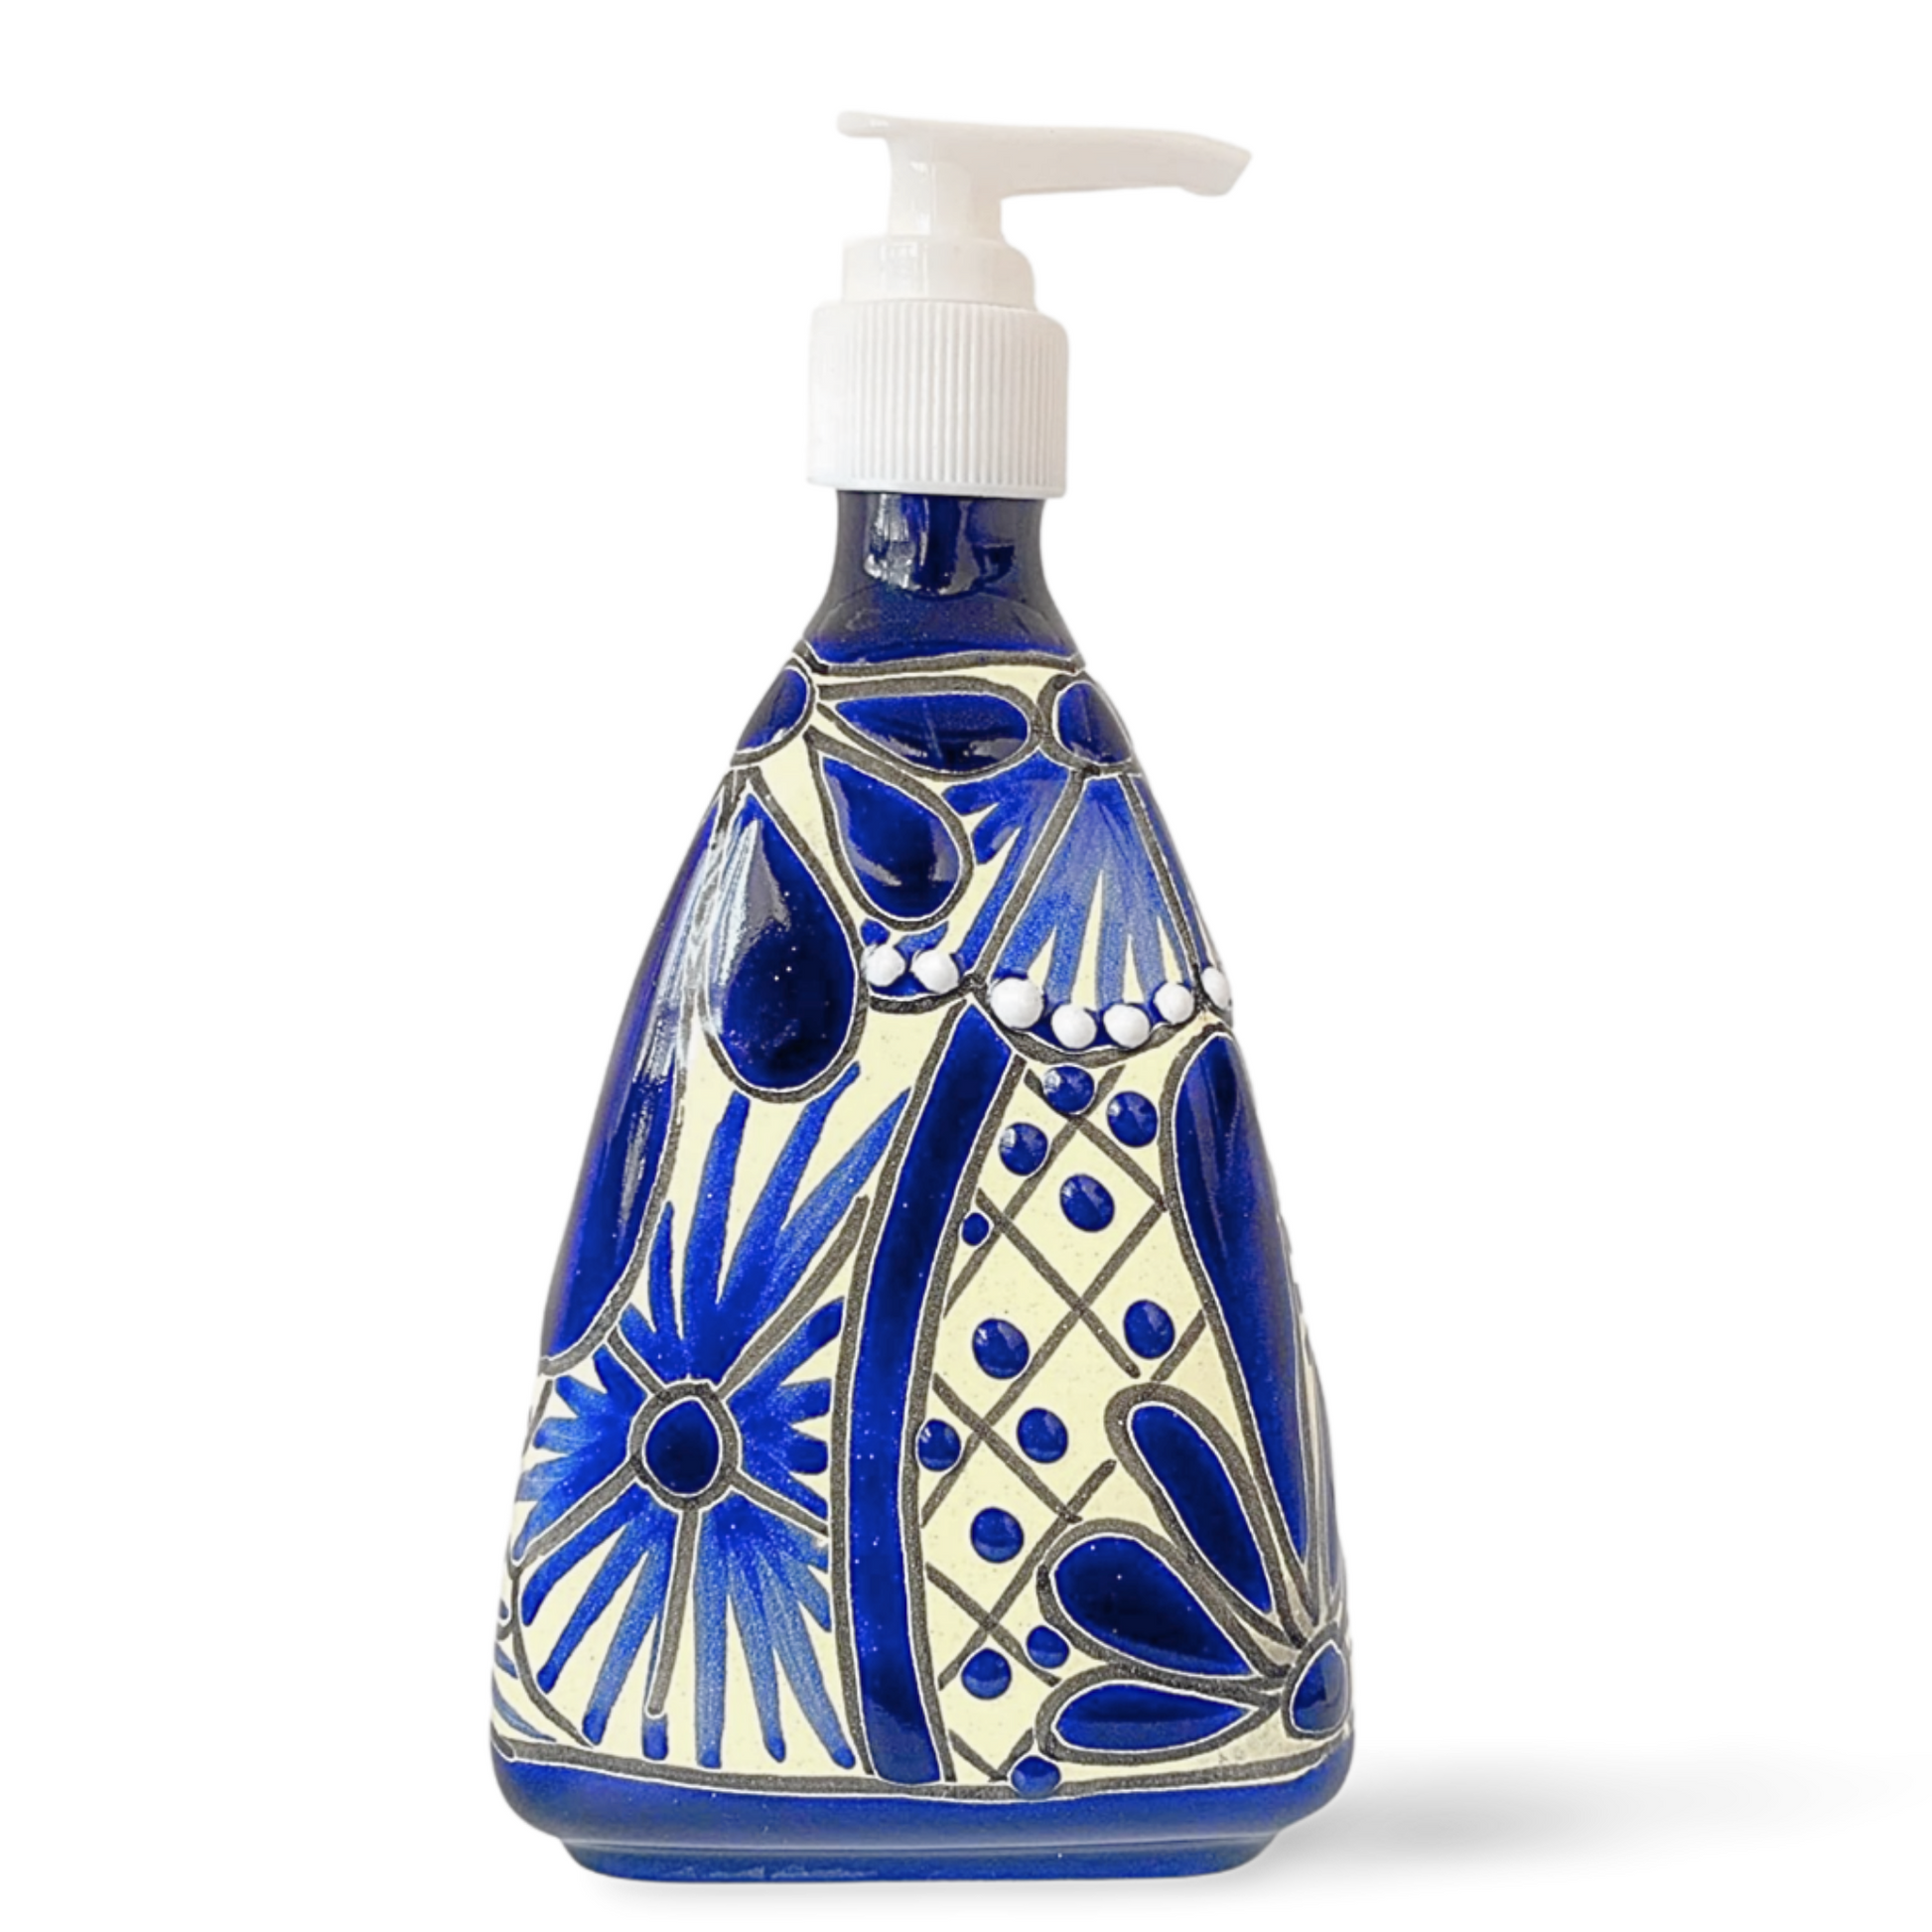 front view An eye-catching, hand-painted, Refillable Ceramic Soap Dispenser, skillfully crafted in Mexico. Perfect for adding a vibrant touch to any kitchen or bathroom.